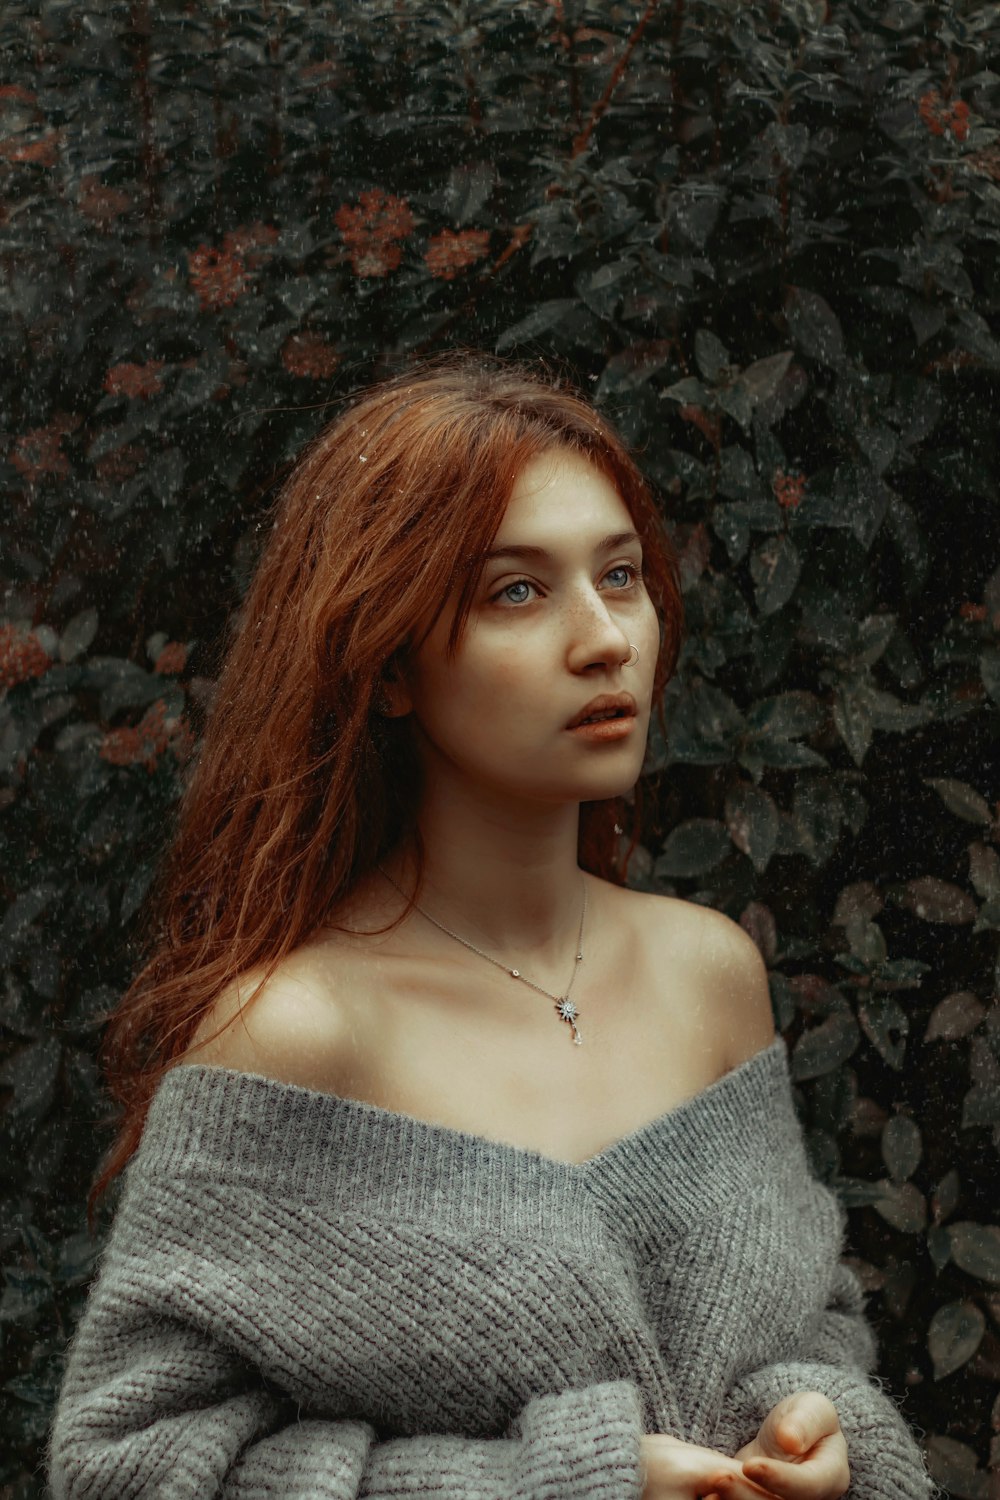 a woman with red hair wearing a gray sweater